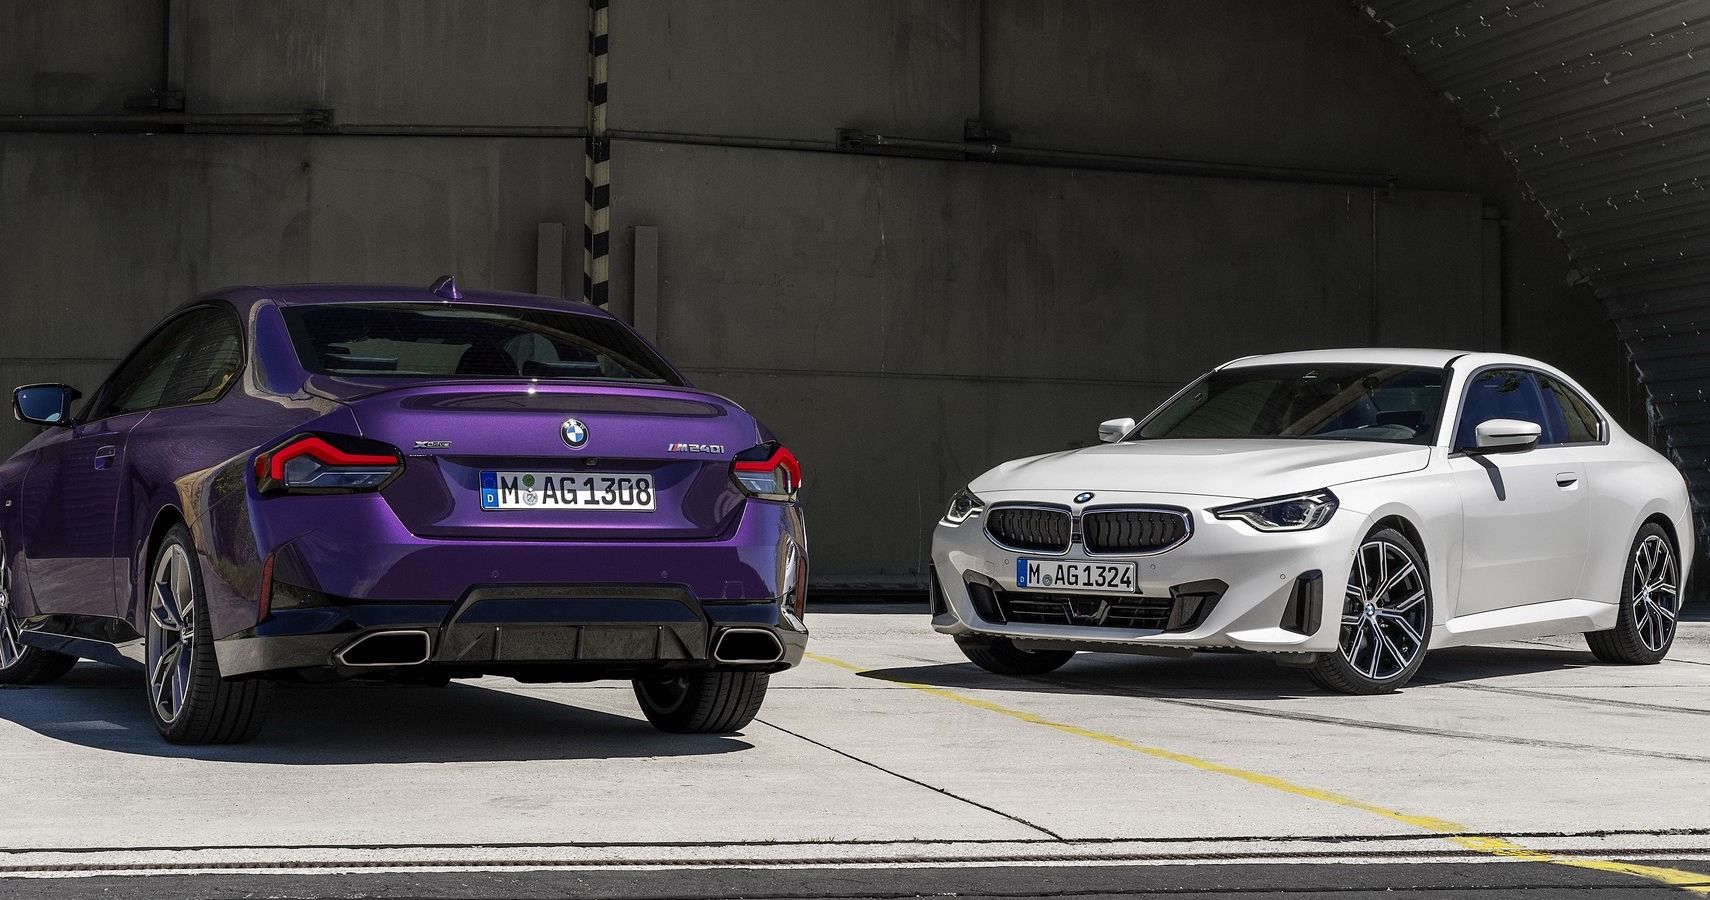 2022-BMW-M240i-Coupe-and-2022-BMW-2-Series-Coupe-Wallpaper-2 copy